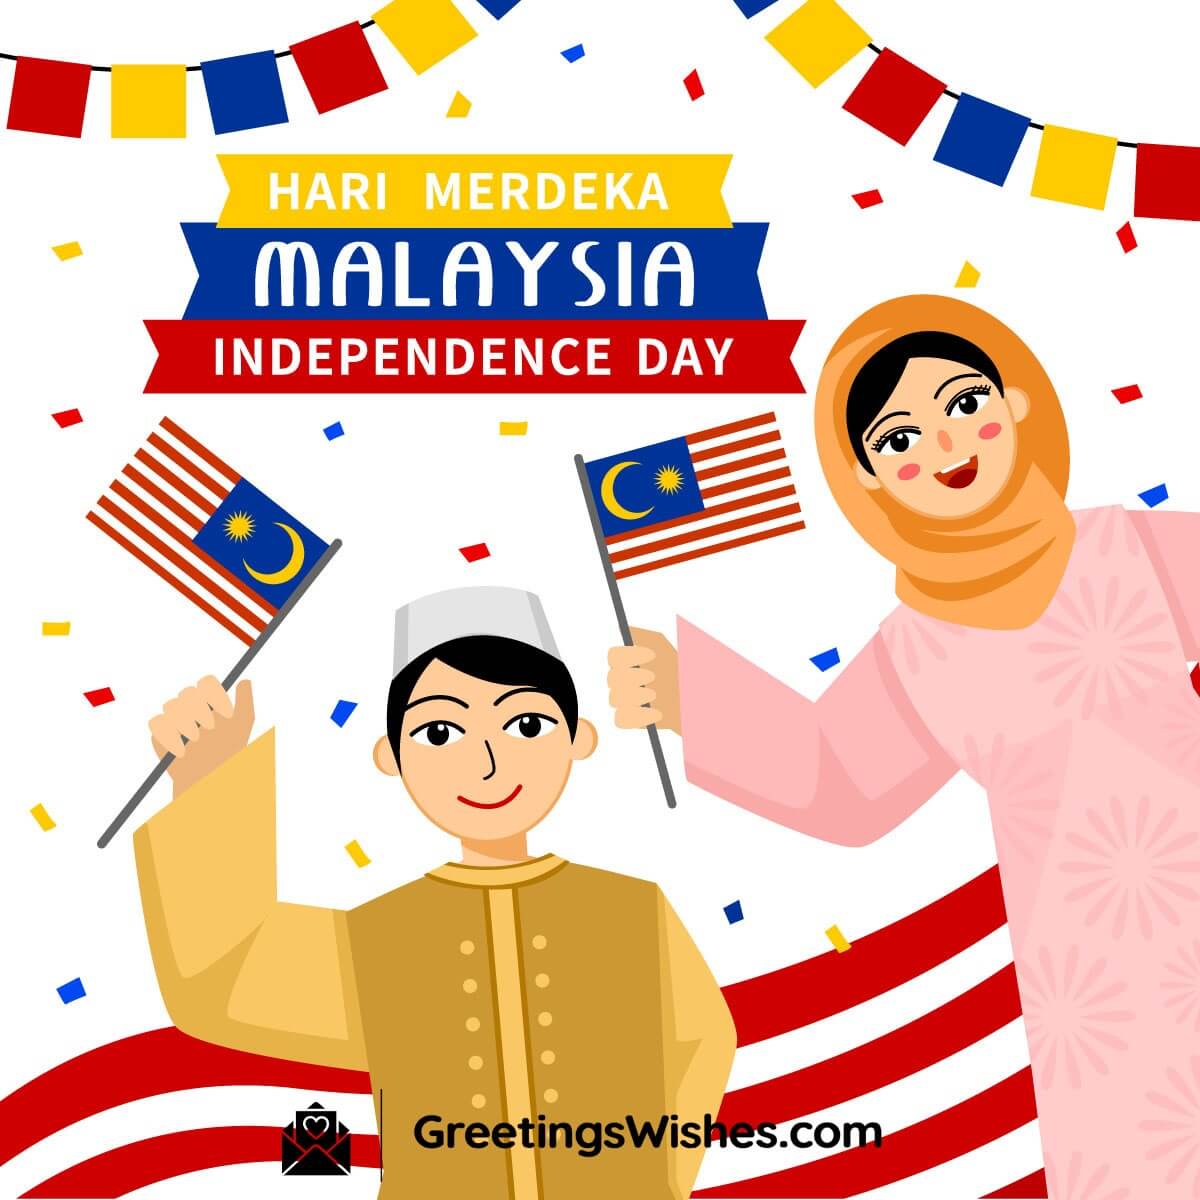 Malaysian Independence Day Image